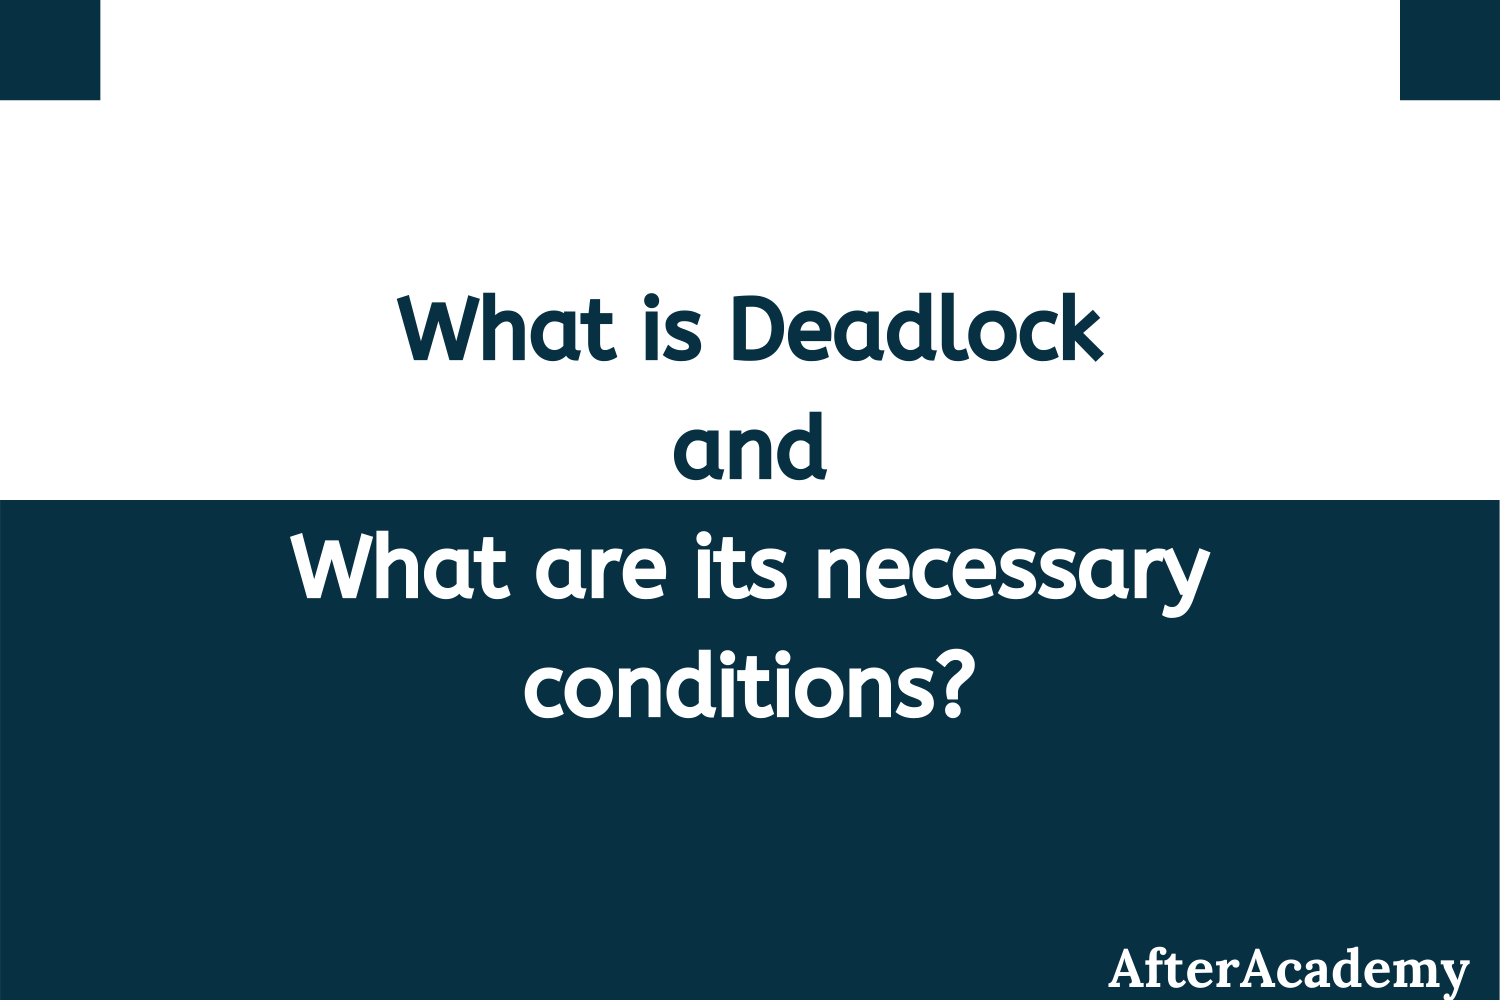 What is Deadlock and what are its four necessary conditions?